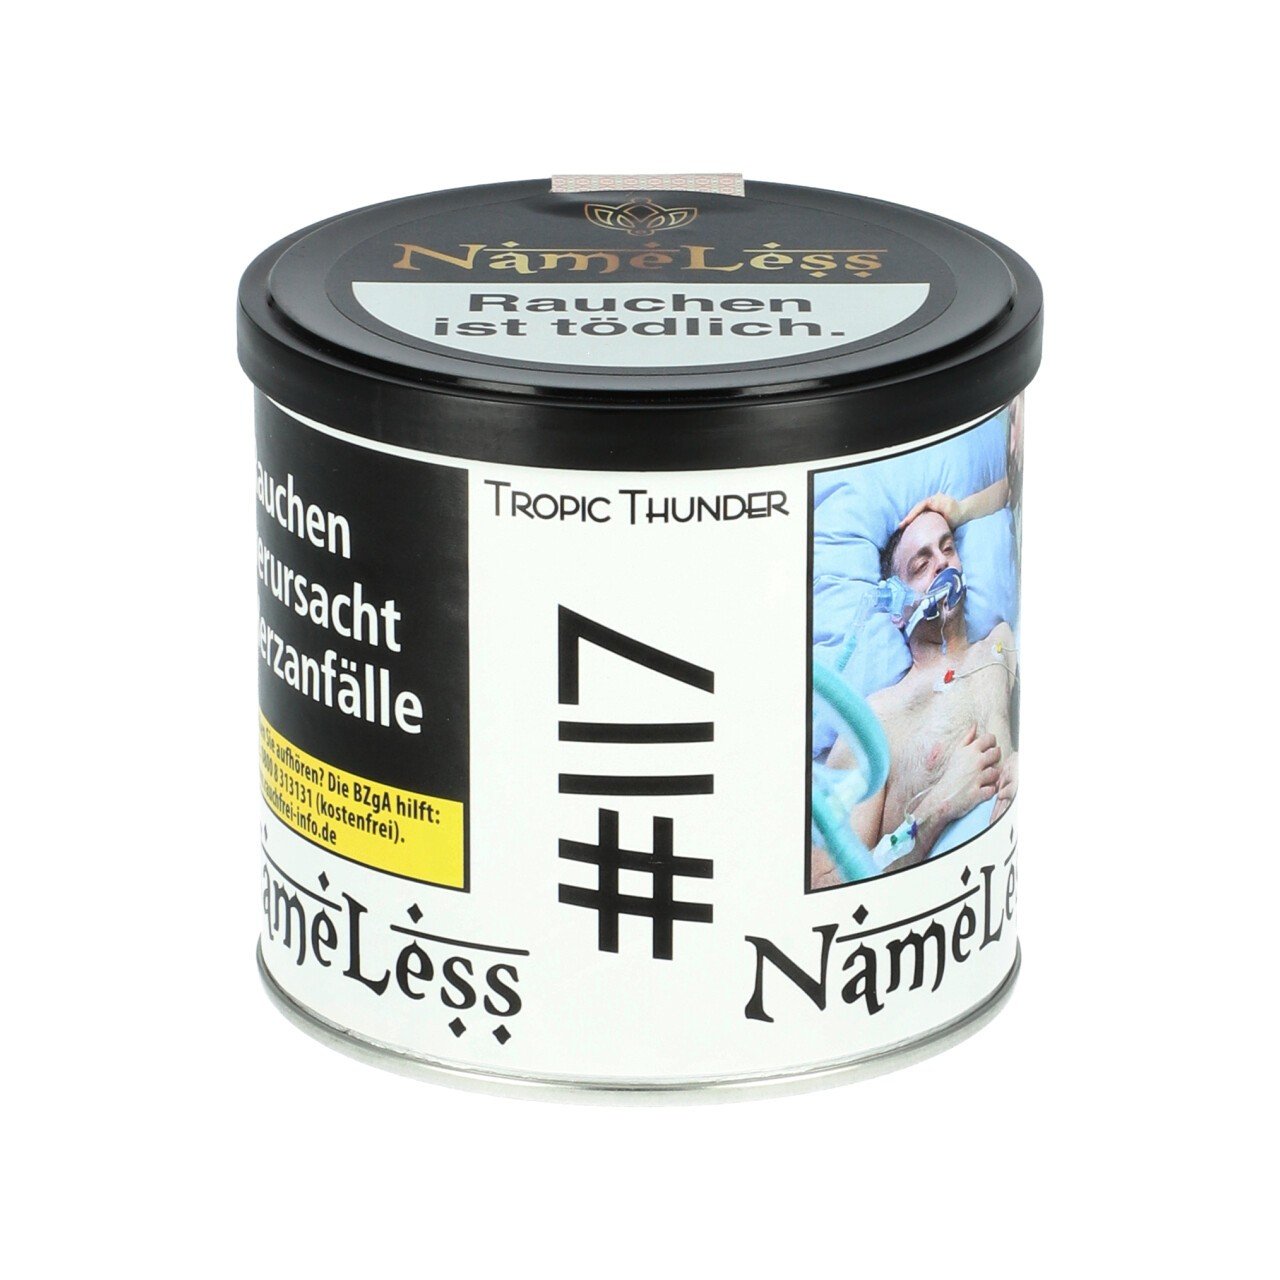 Nameless Special Edition Tropic Thunder 200g